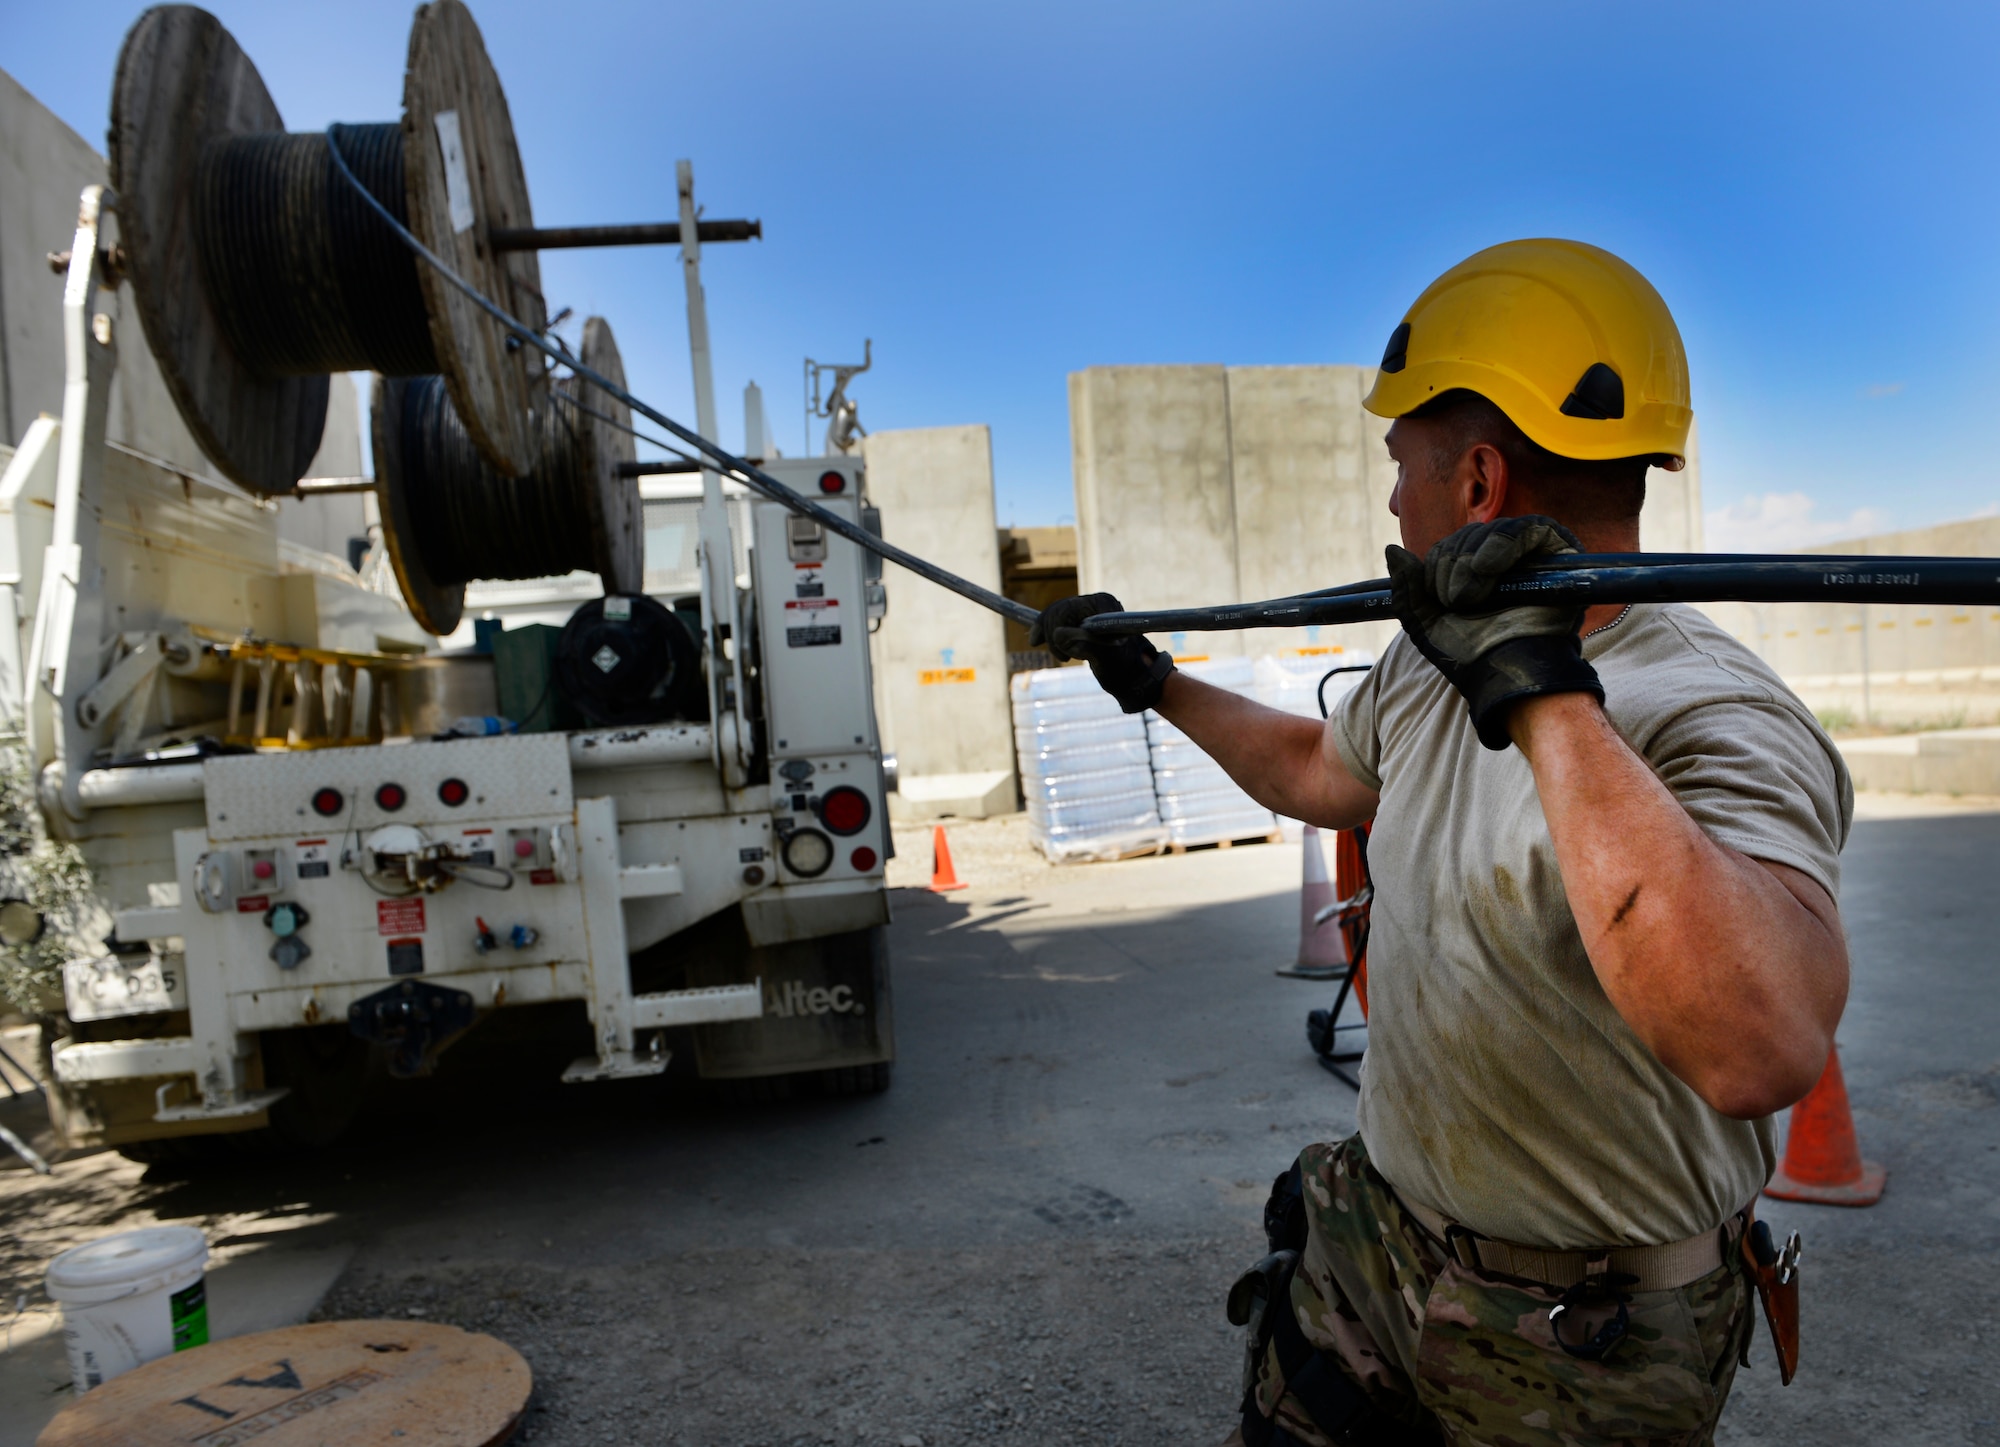 Staff Sgt. Lawence Santos pulls cables May 15, 2014, at Bagram Airfield, Afghanistan. The cable is being used at the air traffic control tower and command post to provide connections for several necessary communication supports needed throughout the base. Santos is a Combined Air and Space Operations Center Engineering and Installations cable and antenna technician. (U.S. Air Force photo/Senior Airman Sandra Welch)